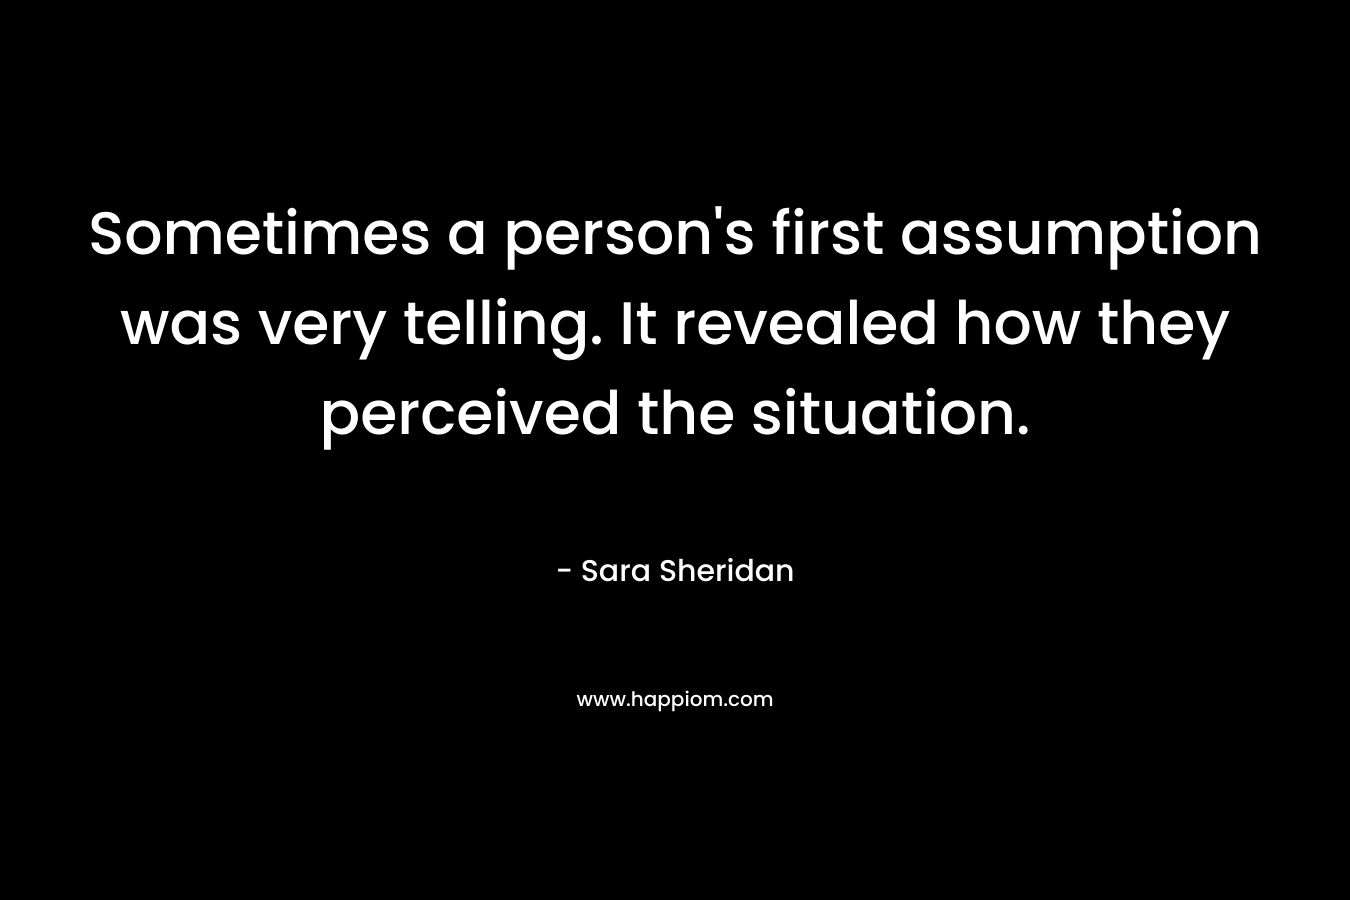 Sometimes a person's first assumption was very telling. It revealed how they perceived the situation.